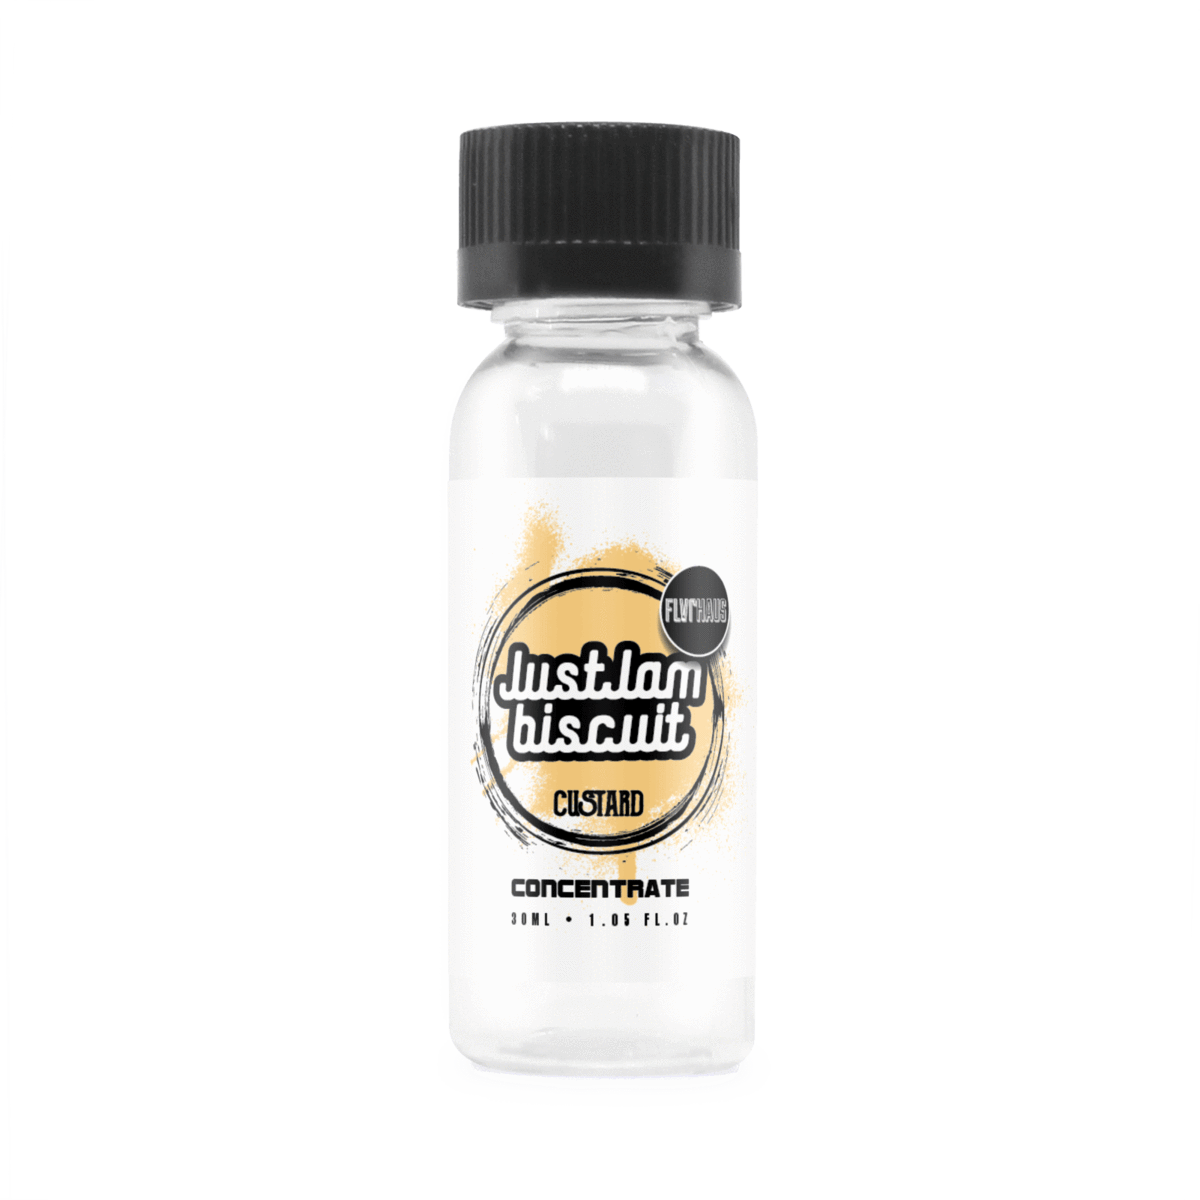 Custard Biscuit Concentrate E-Liquid by Just Jam 30ml